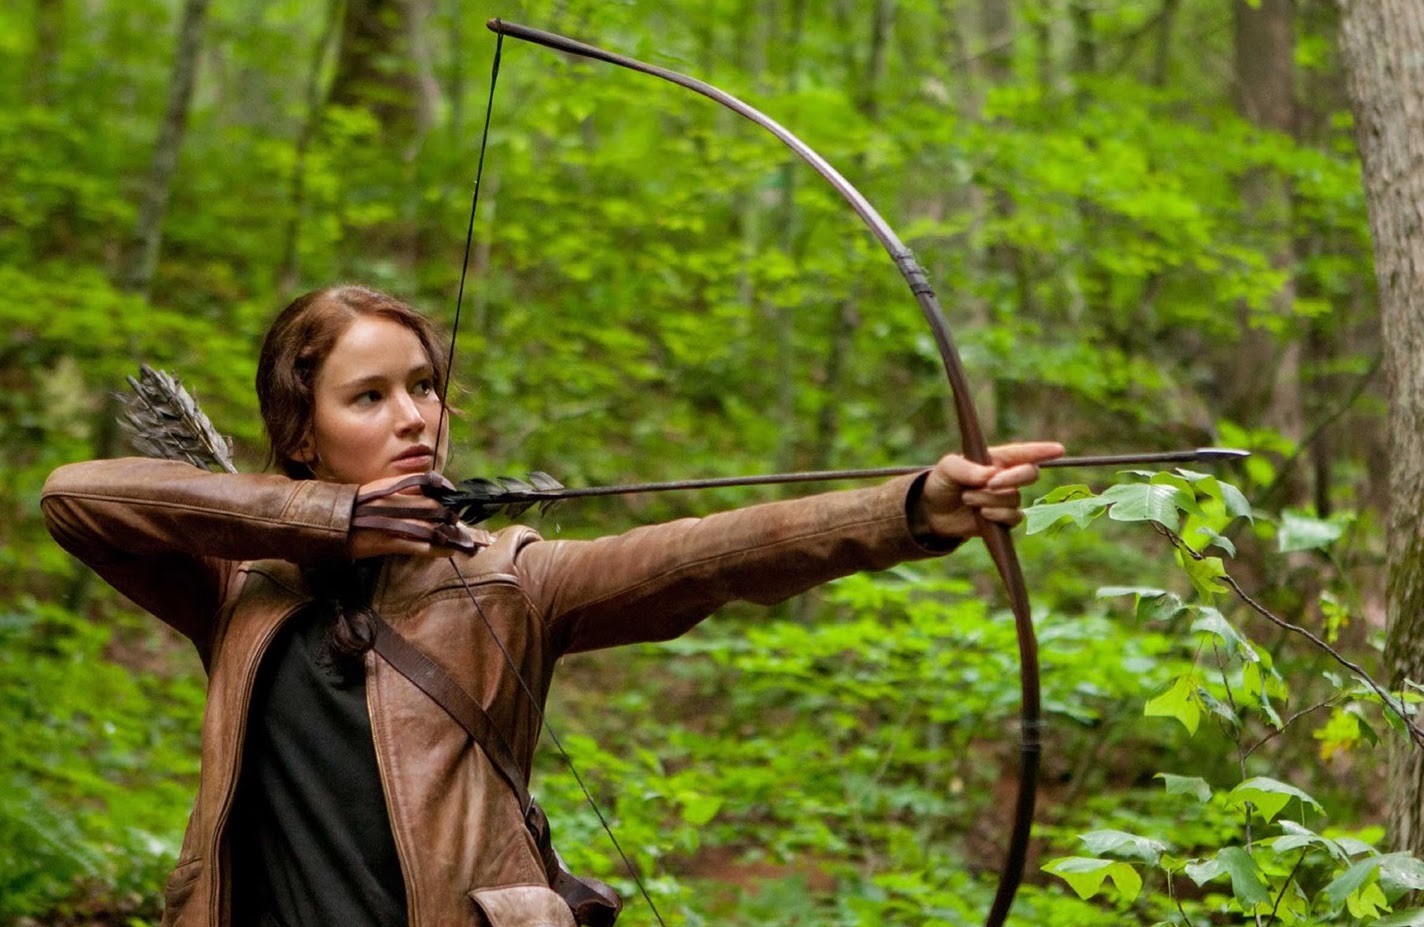 A brown haired teen girl with her hair in a braid pulls back her bow and arrow in the forest.